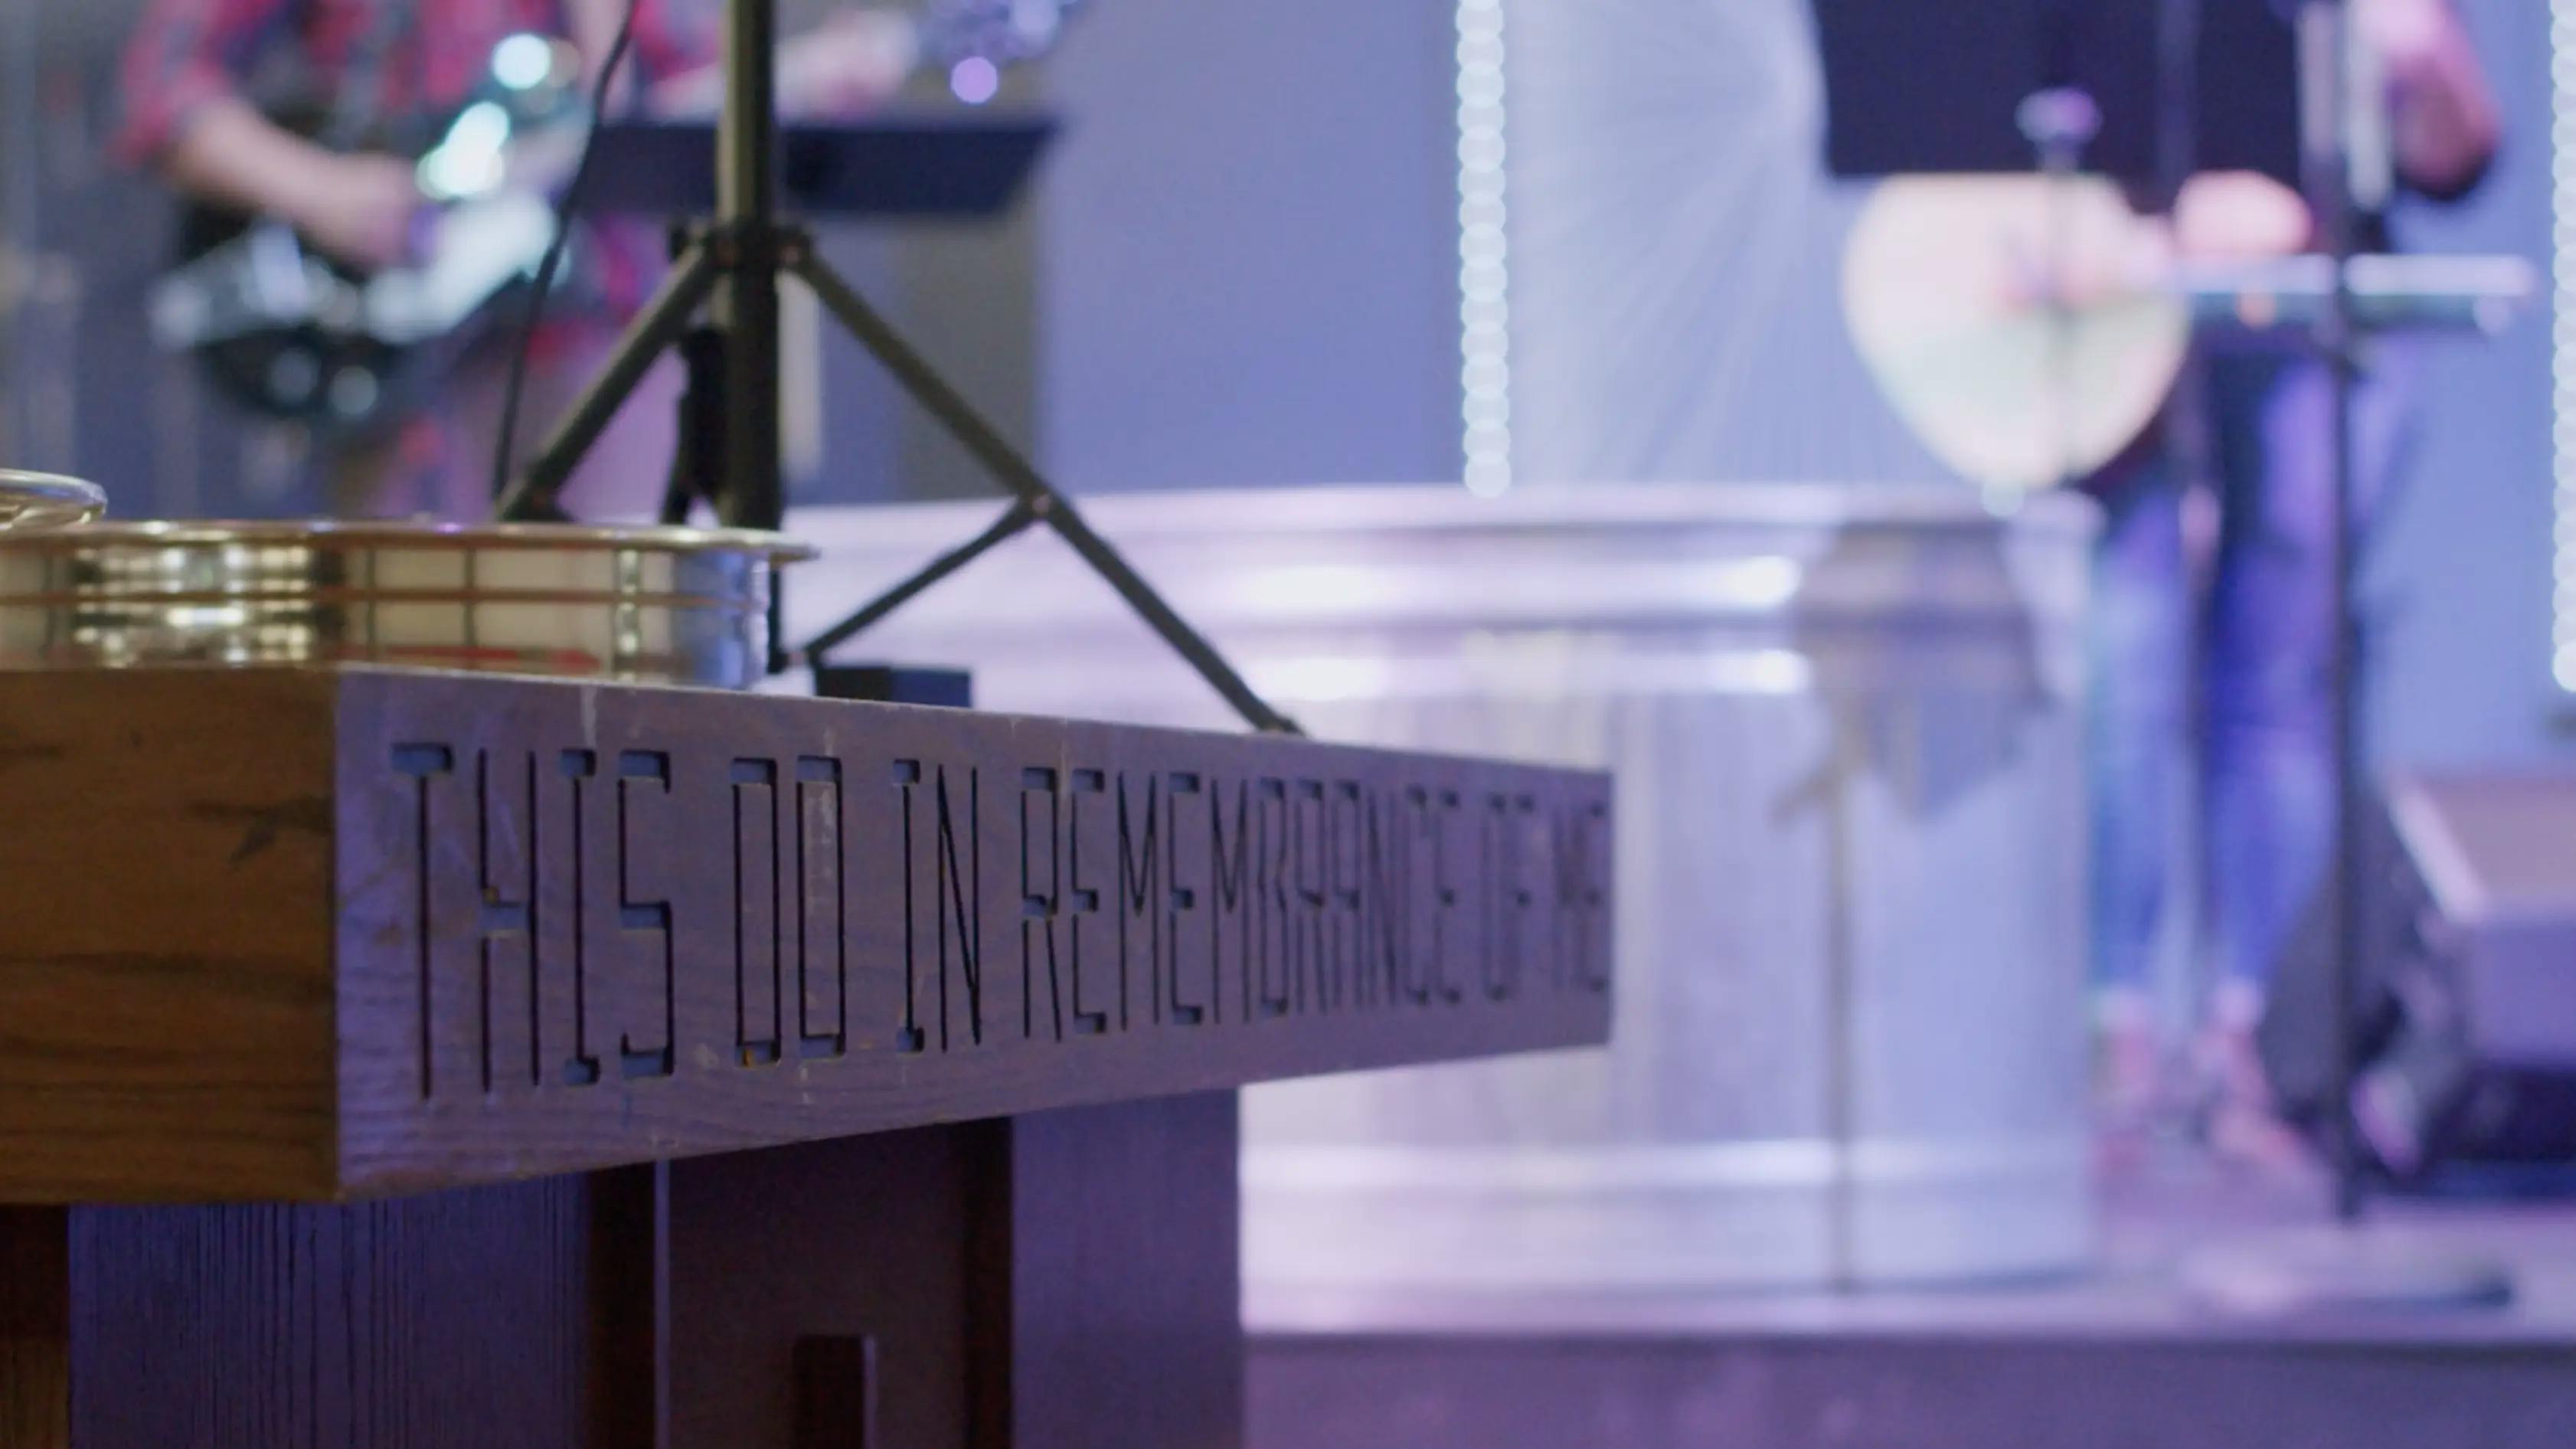 A communion table that reads "Do this in remembrance of me"